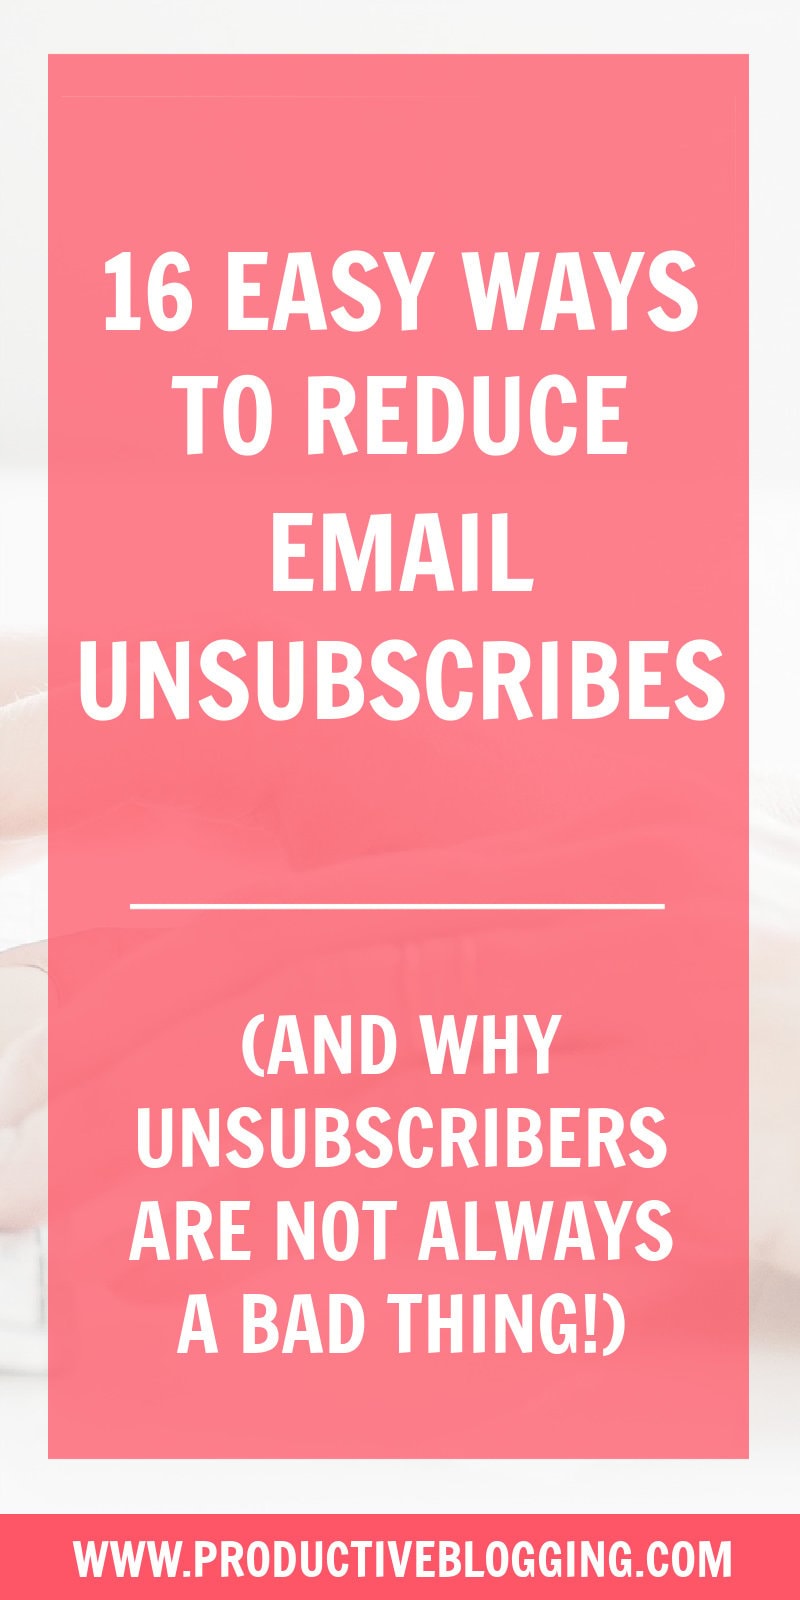 Is your email unsubscribe rate too high? Are you fed up with seeing loads of unsubscribers every time you send an email? Here are 16 easy ways to reduce email unsubscribes. #unsubscribers #emailunsubscribes #unsubscriberate #emailsubscribers #emaillist #emailmarketing #blog #blogging #blogger #bloggingtips #blogginglife #bloglife #professionalblogger #bloggingismyjob #solopreneur #mompreneur #fempreneur #contentmarketing #bloggingbiz #productivitytips #blogsmarternotharder #productiveblogging